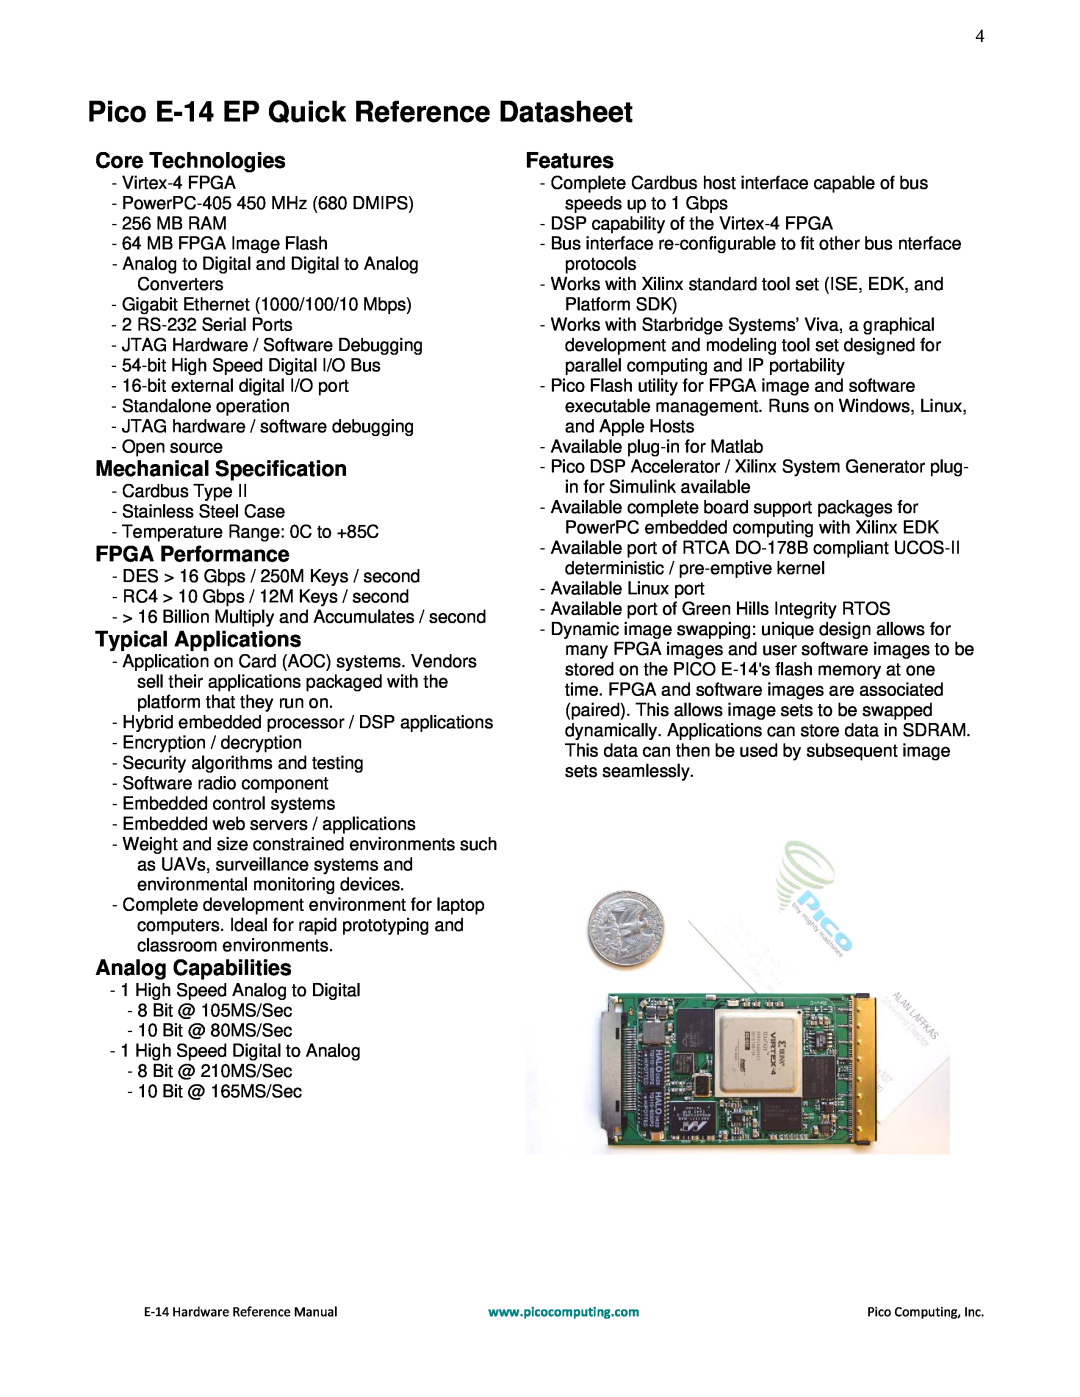 Pico Communications manual Pico E-14 EP Quick Reference Datasheet, Core Technologies, Mechanical Specification, Features 